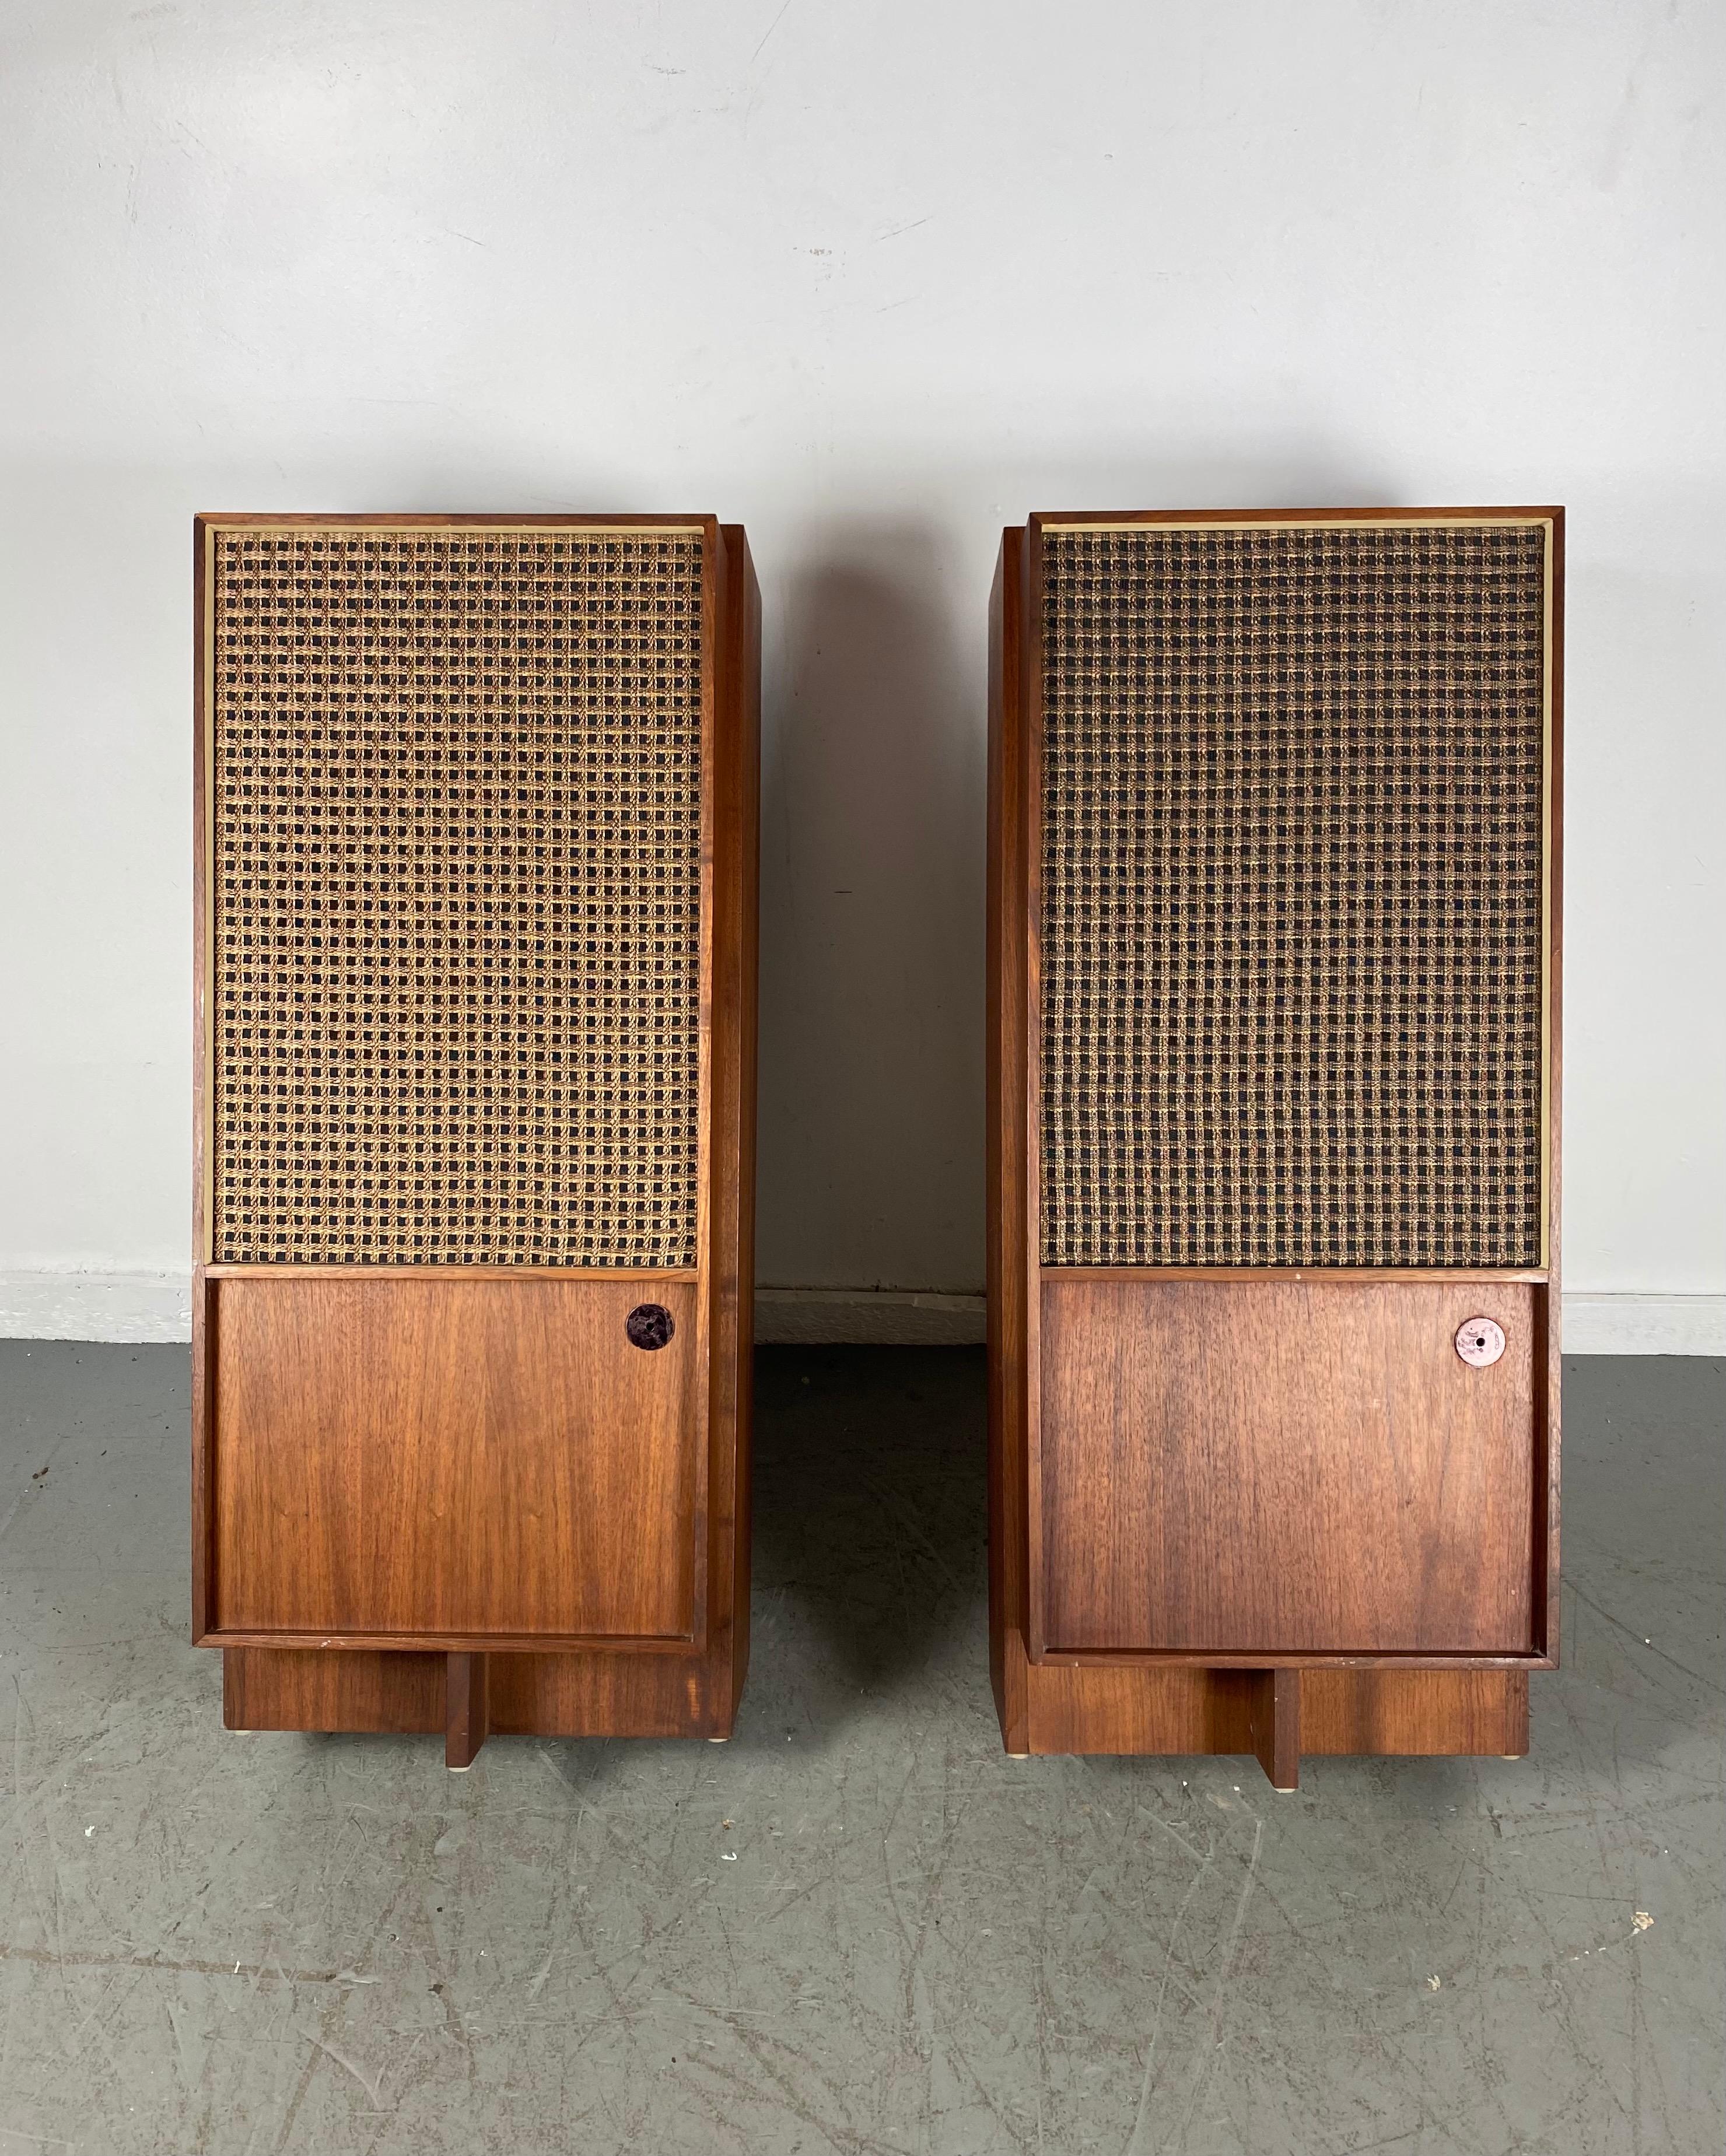 Pair large modernist walnut audio speakers by Bozak, stunning design, reminiscent of Frank Lloyd Wright Design, amazing original condition, tested and working perfectly, sound amazing, hand delivery avail to New York City or anywhere en route from